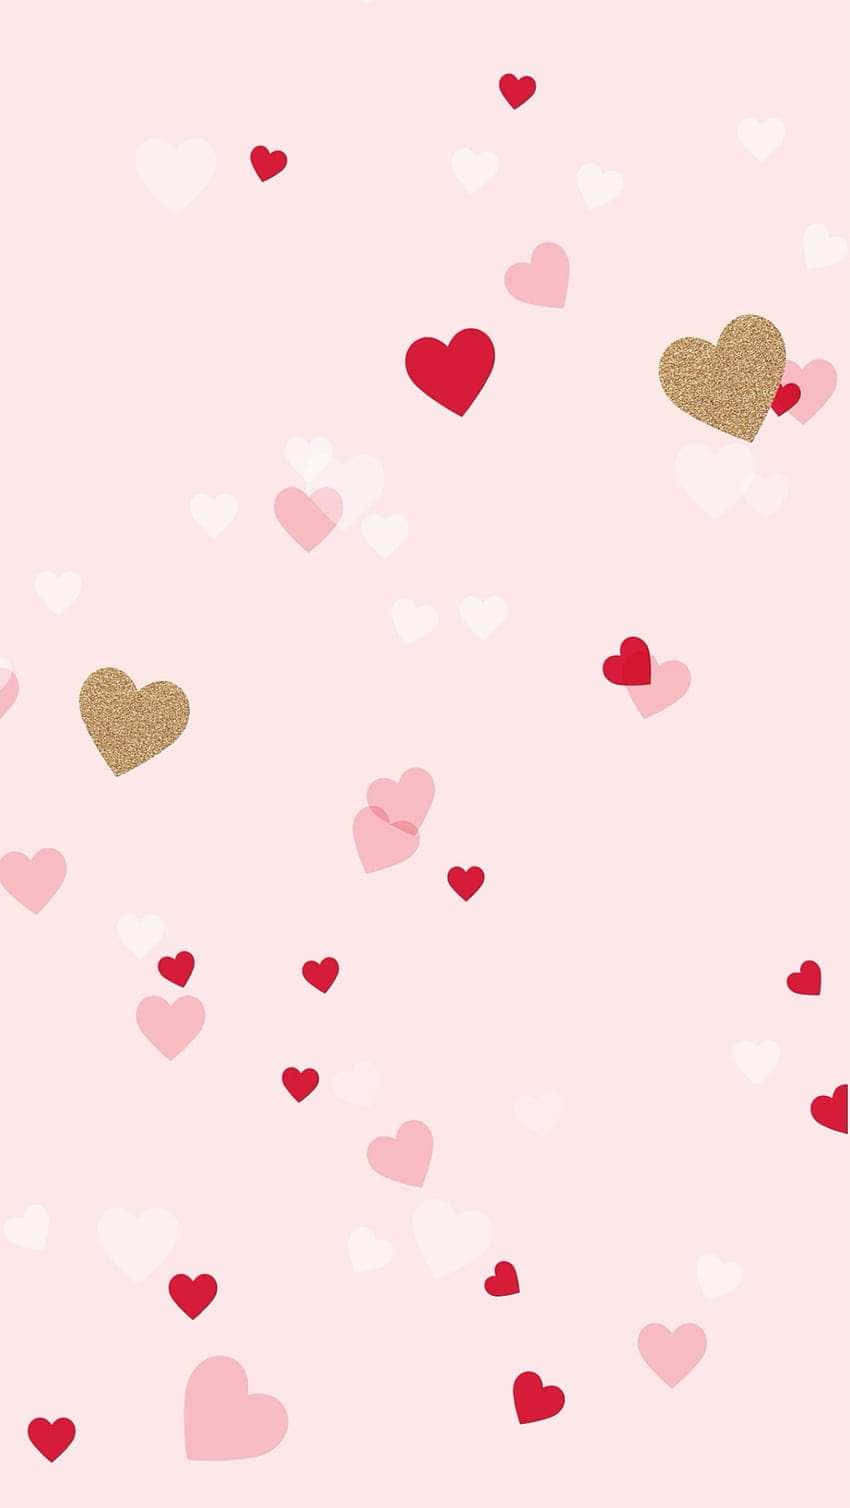 Lovecore Hearts Pattern Pink Background Wallpaper